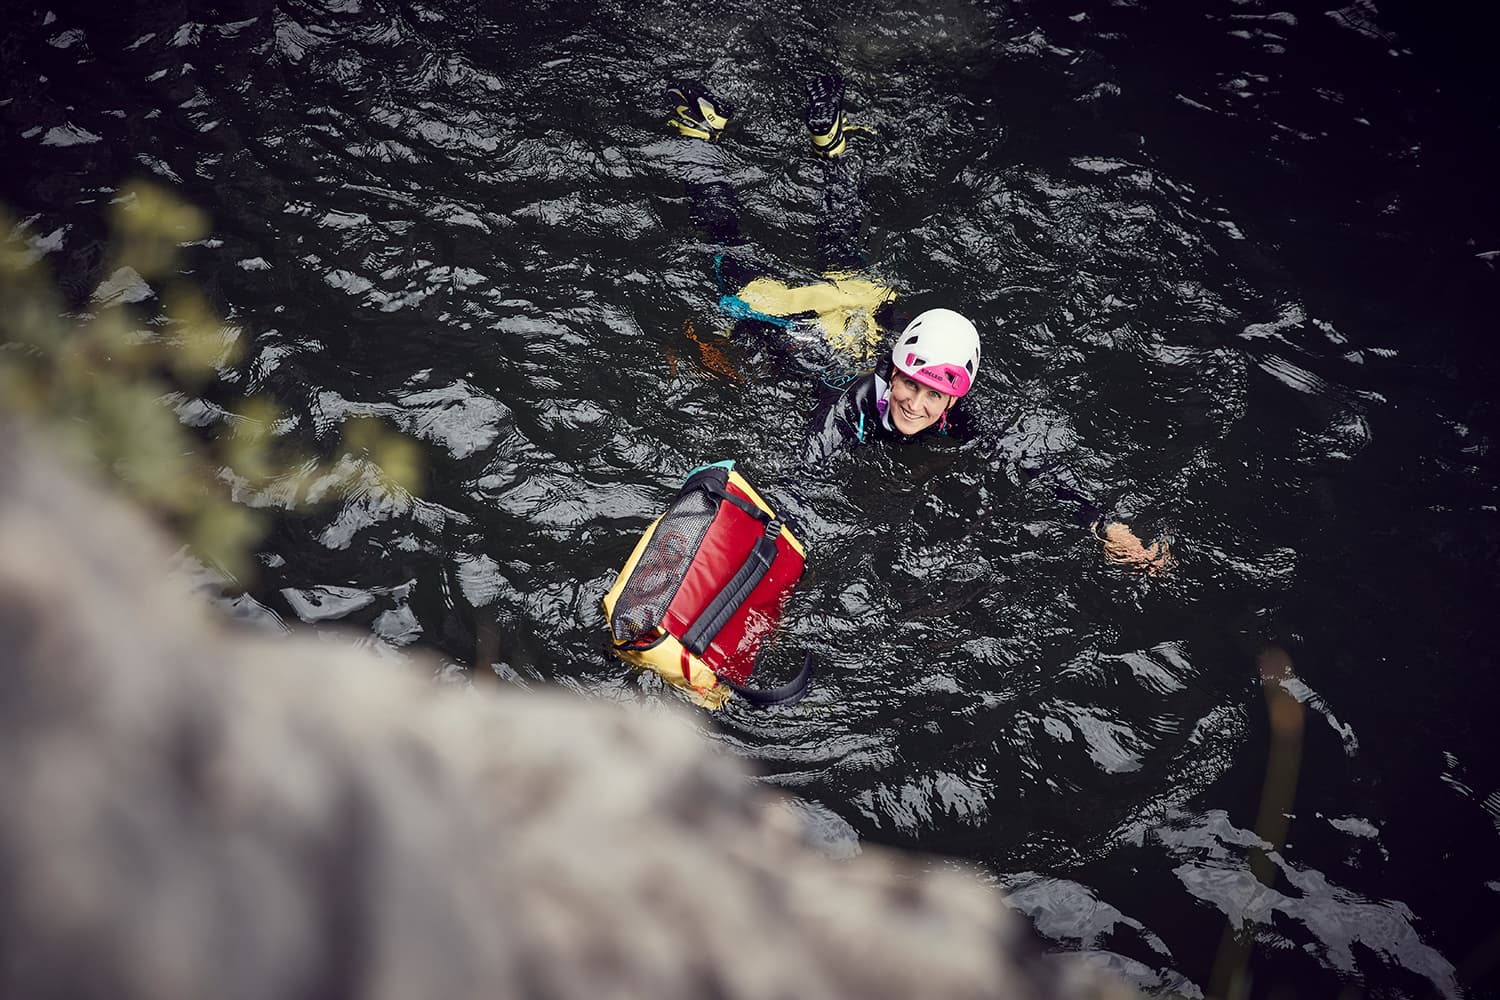 Stunt woman Kim swimming through a black pool pushing a bag and wearing a helmet while canyoning